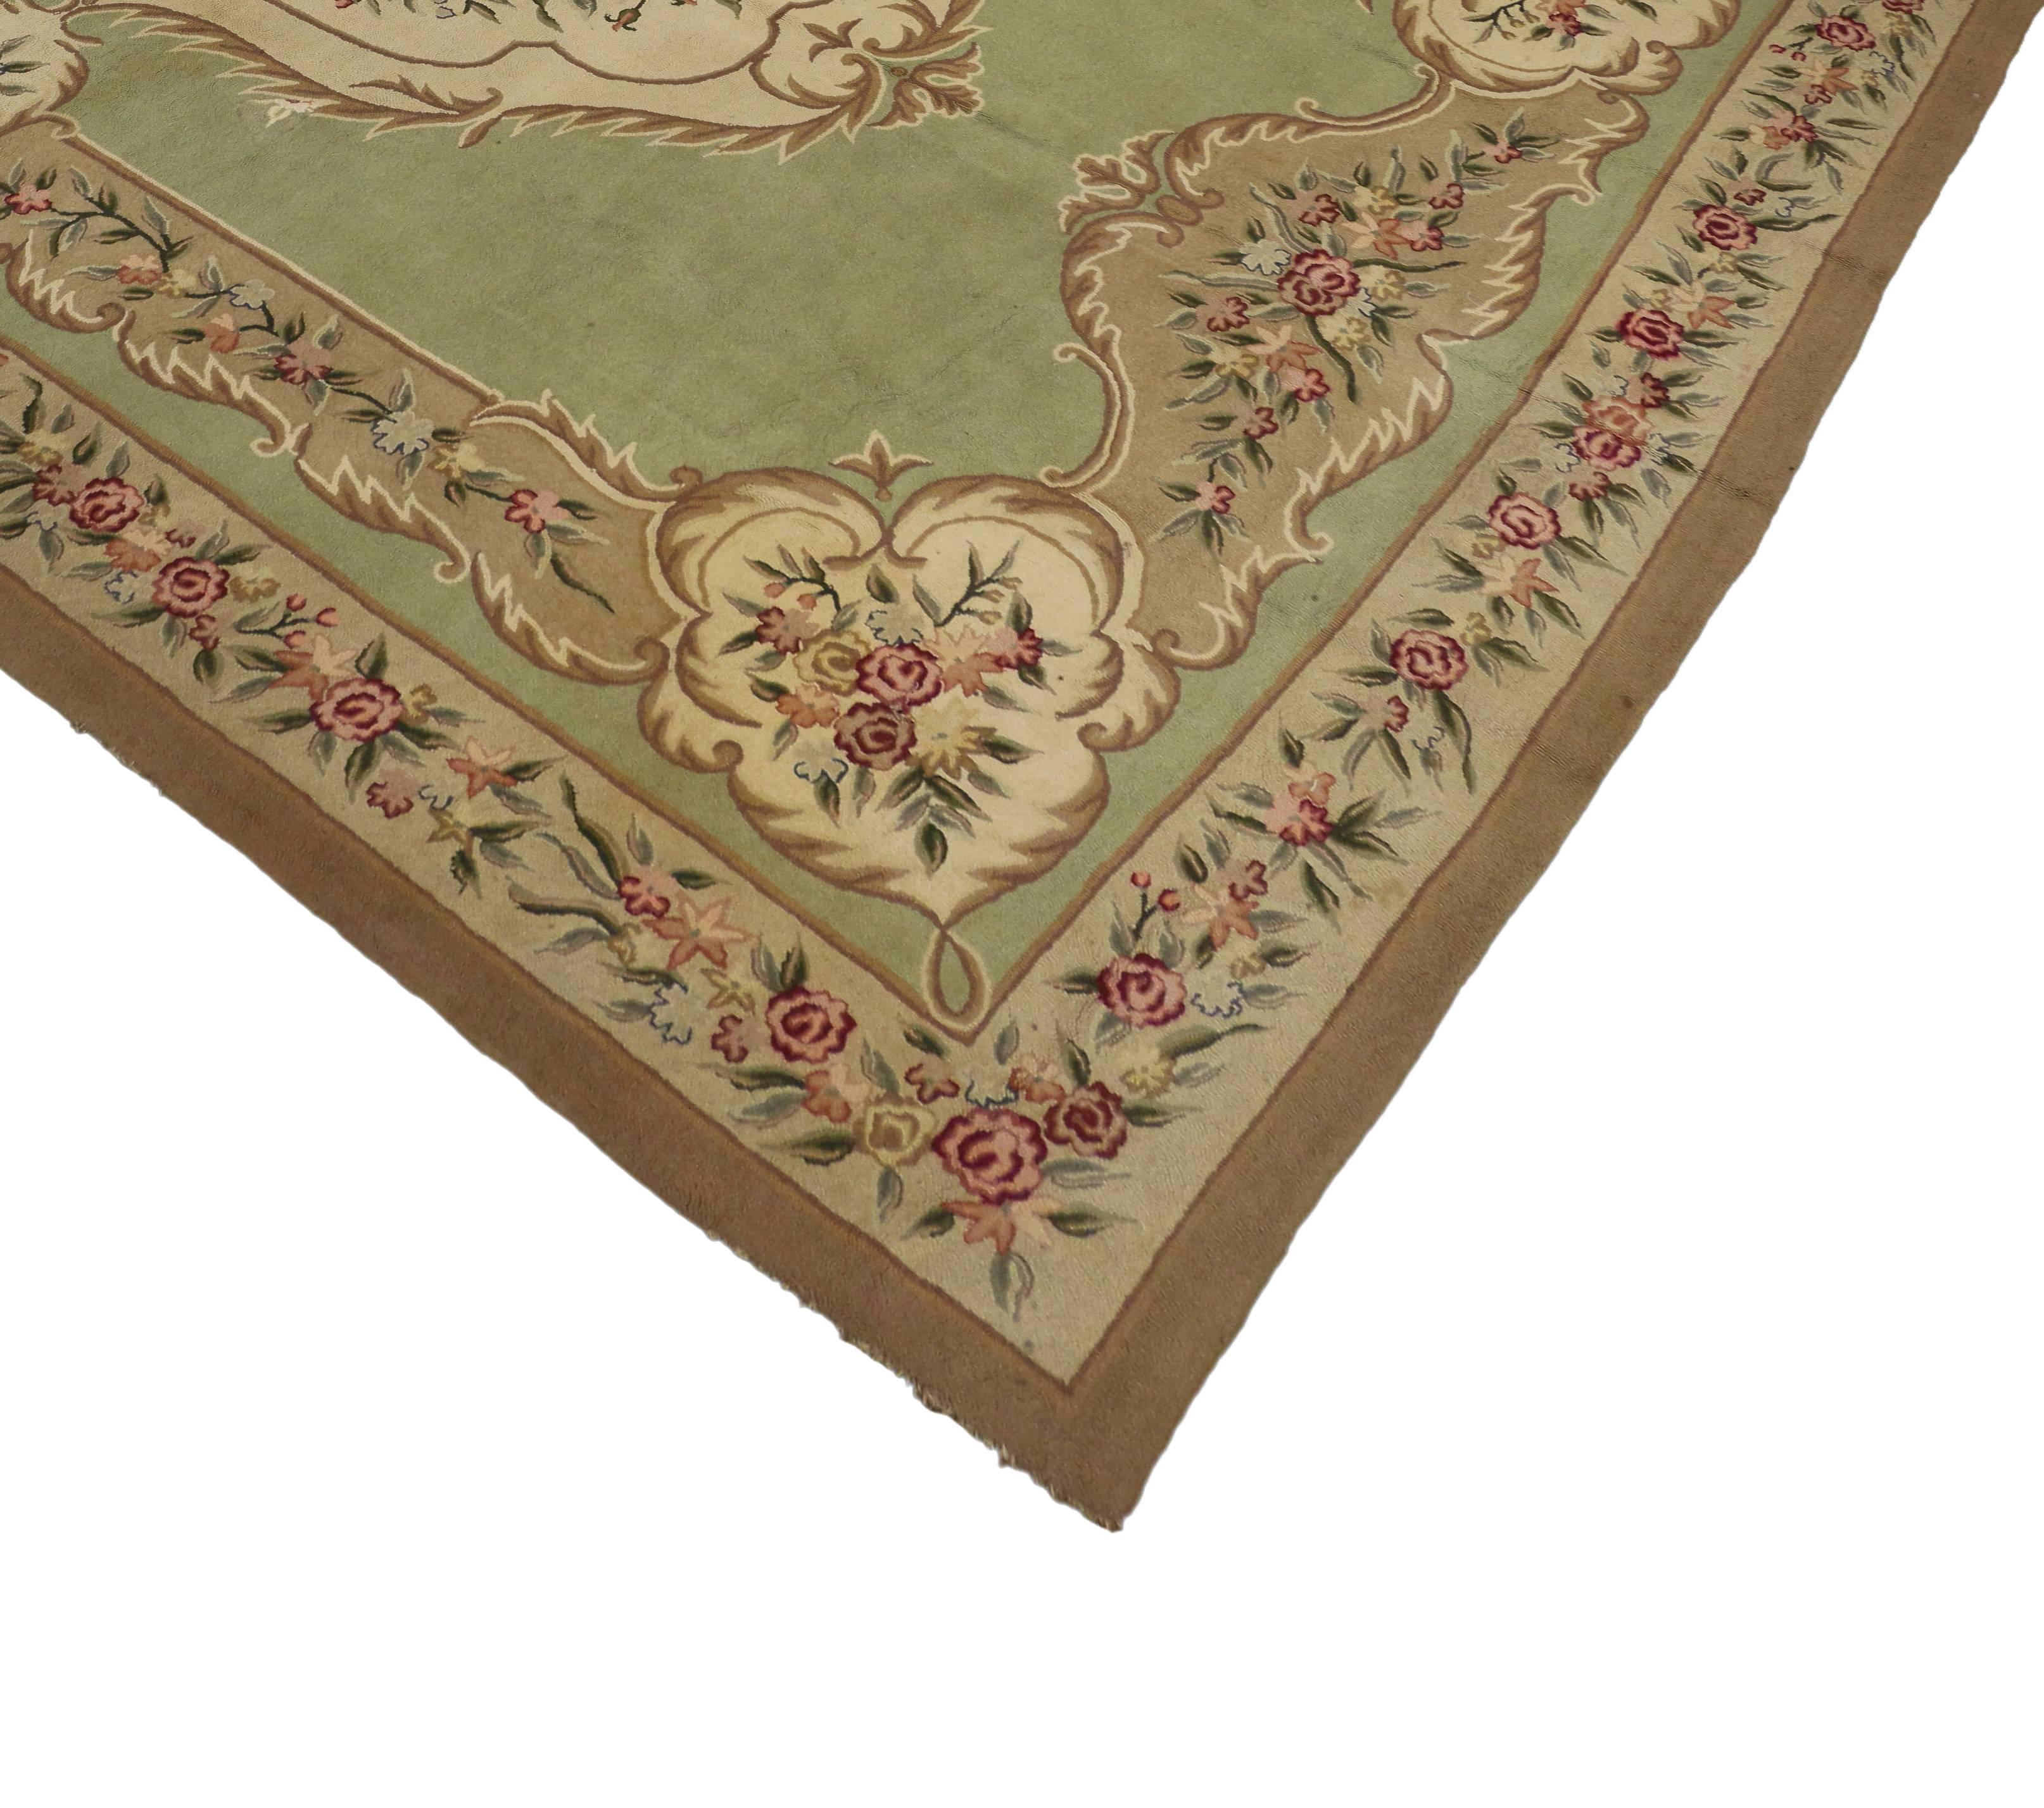 70860 Antique French Aubusson Chinese Hooked Palace Size Rug with Chintz Style 11'06 x 17'08. Drawing inspiration from Mario Buatta, Chintz style and design elements from the 18th century in France, this antique Chinese Aubusson style hooked rug